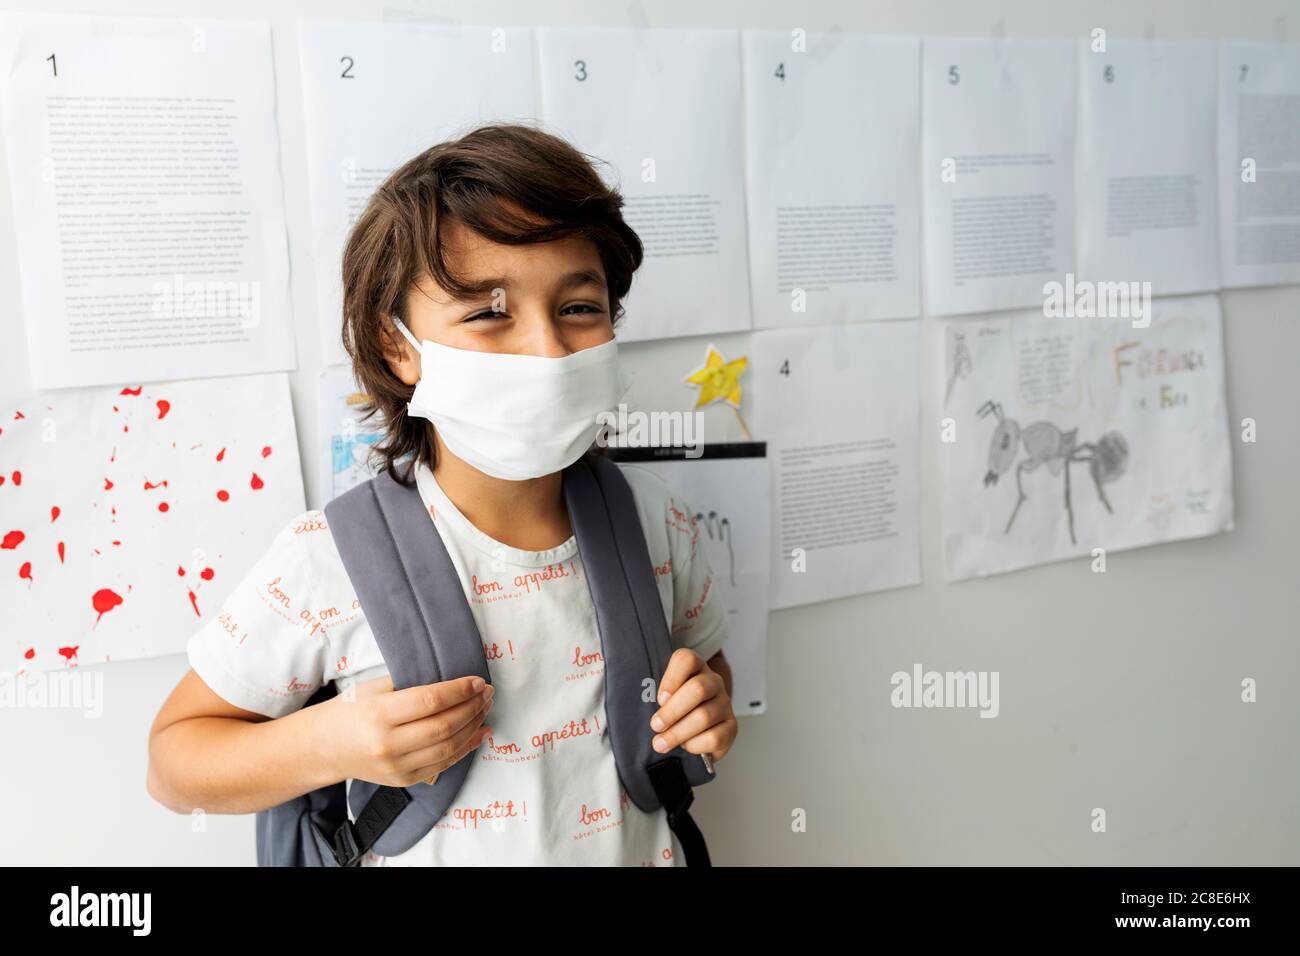 Boy wearing mask standing against papers stuck on wall in school Stock Photo